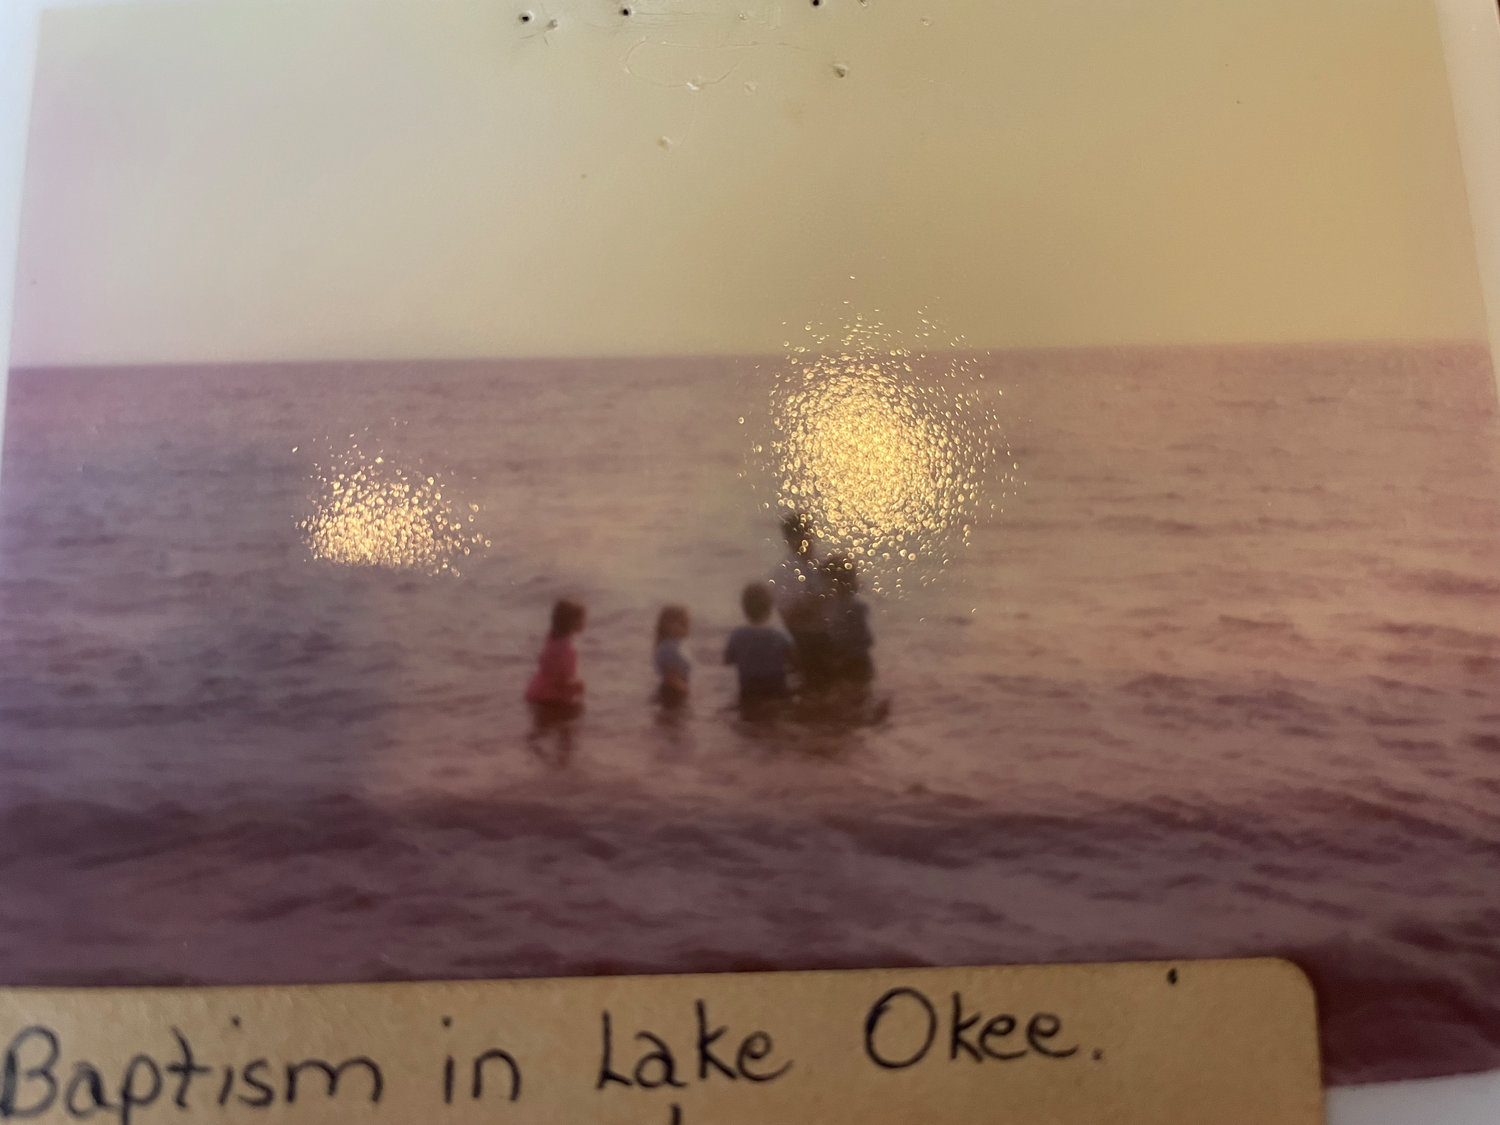 Victory Baptist Church holds its first baptism in Lake Okeechobee in 1977.